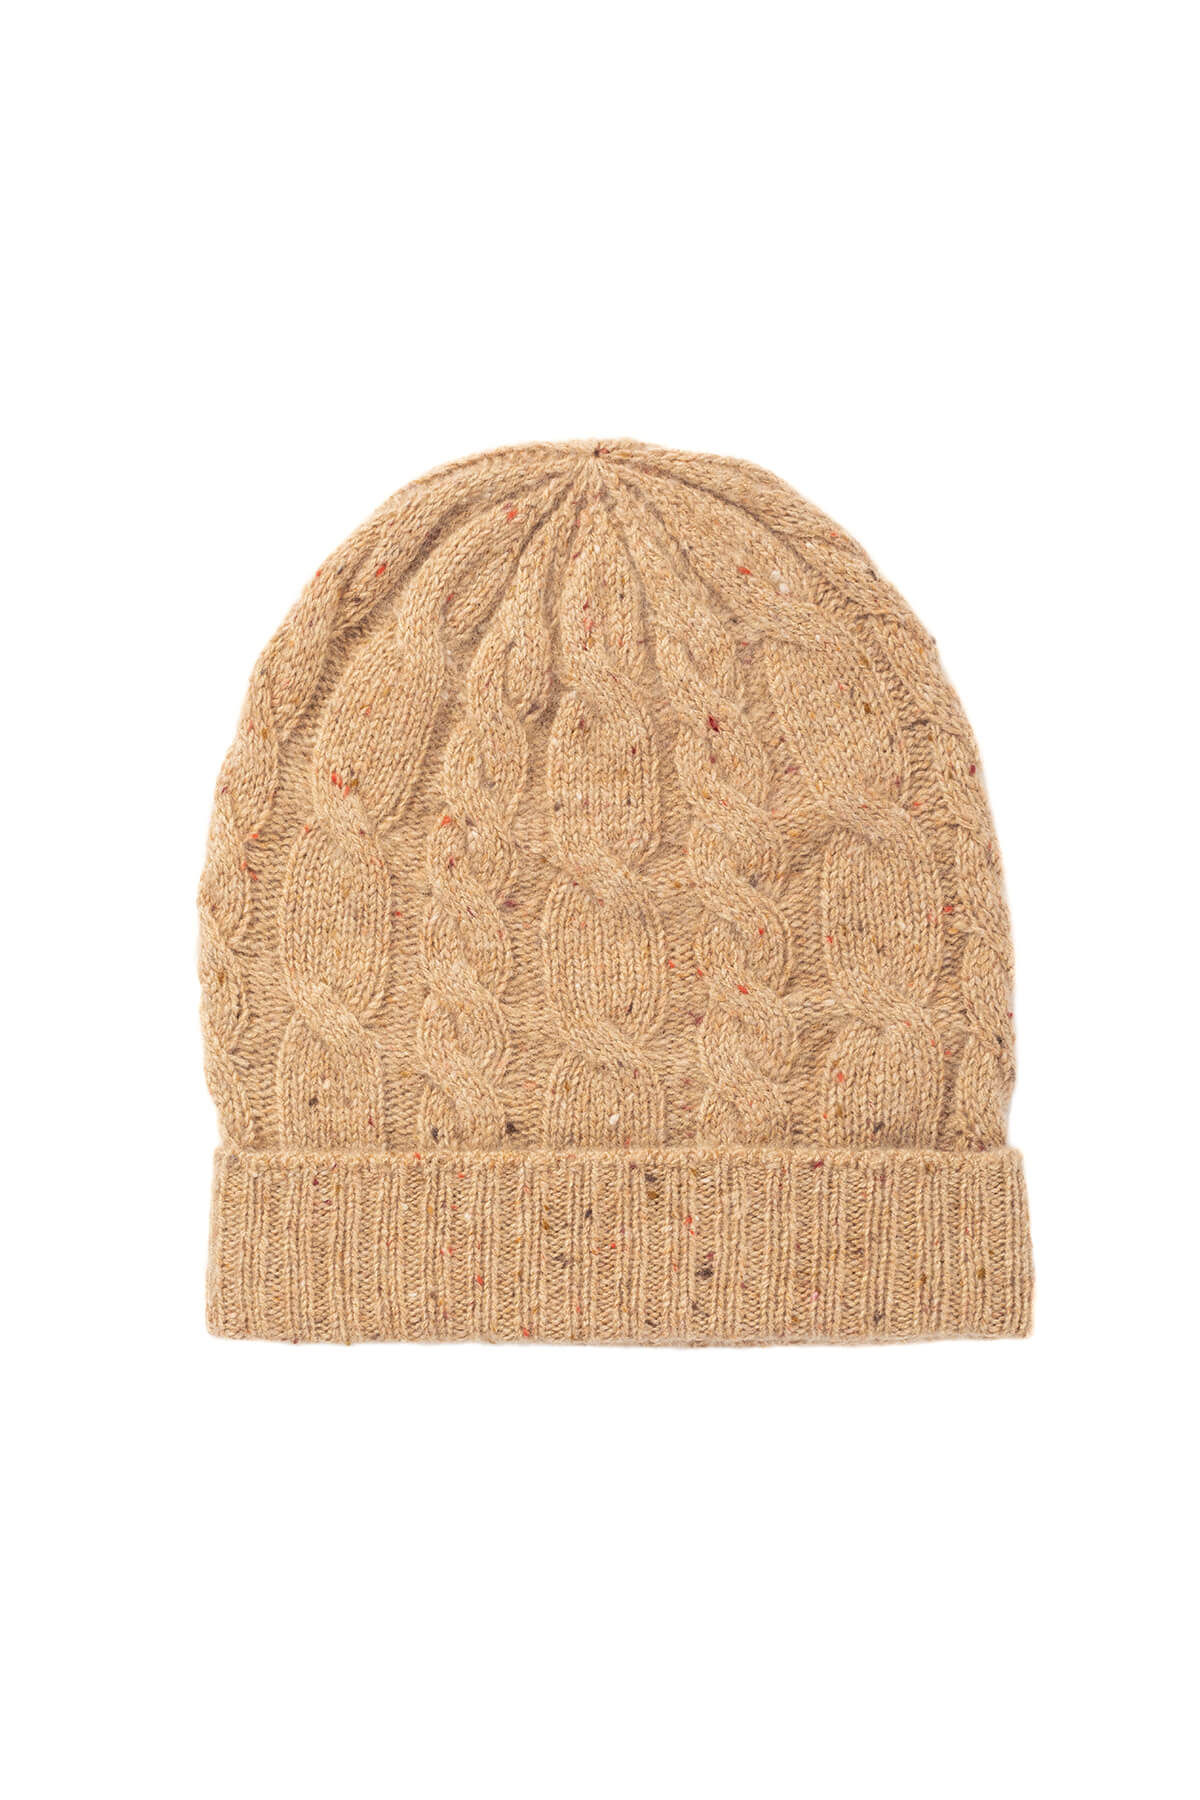 Johnstons of Elgin’s Camel Cashmere Donegal Cable Beanie on a white background HAY03304004507